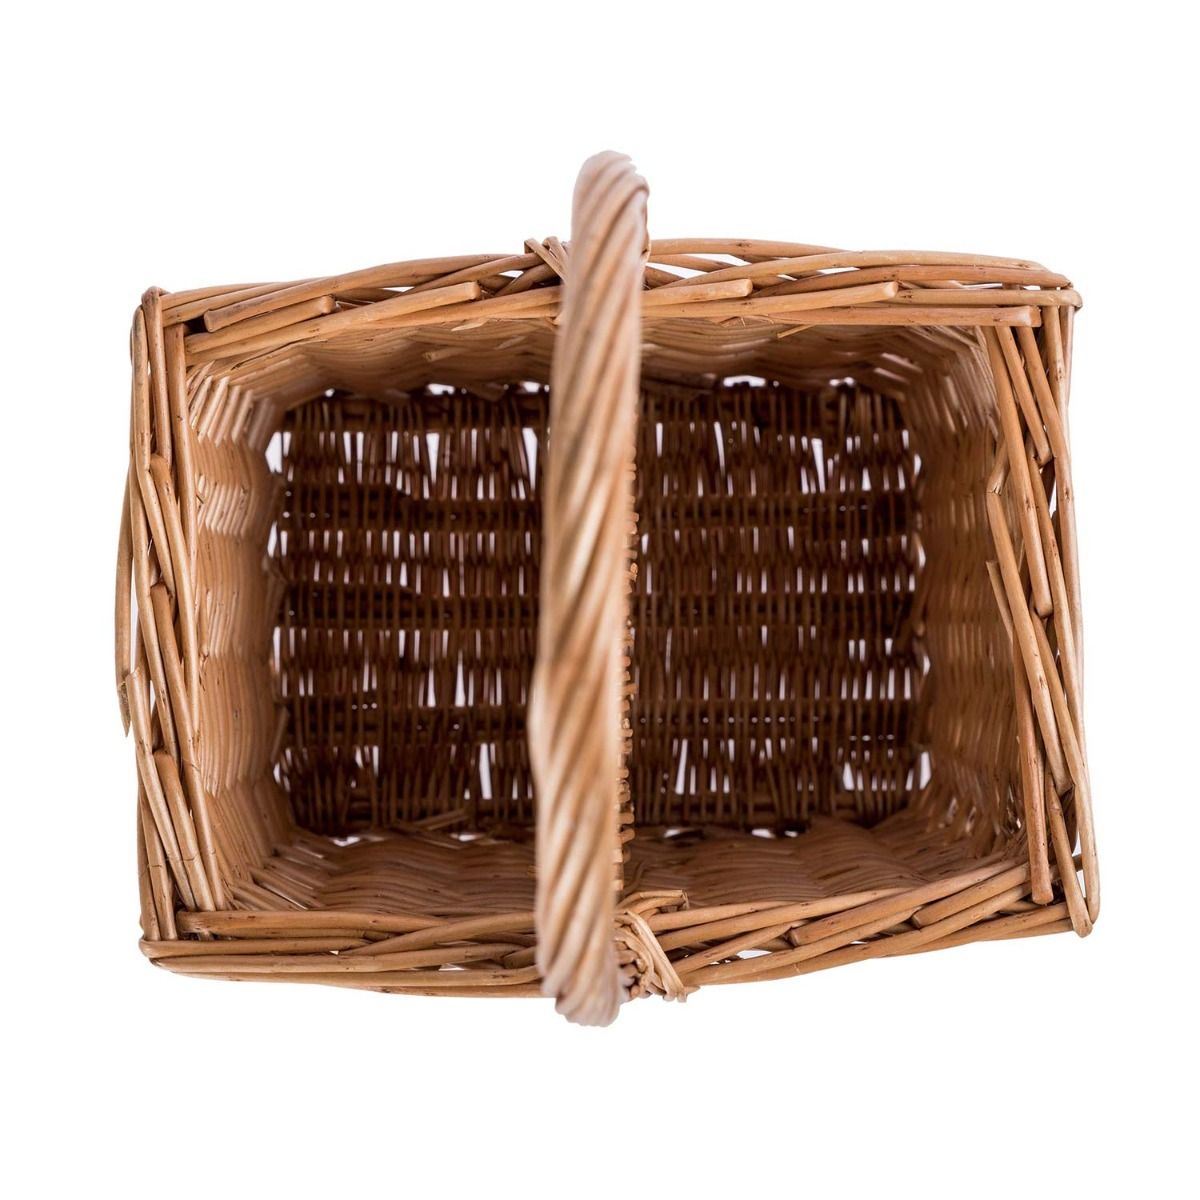 Woven Willow Carry Crate with Two Compartments and Twisted Handle Cutlery Container or Gift Basket Homescapes Natural Wicker Wine Bottle Carrier